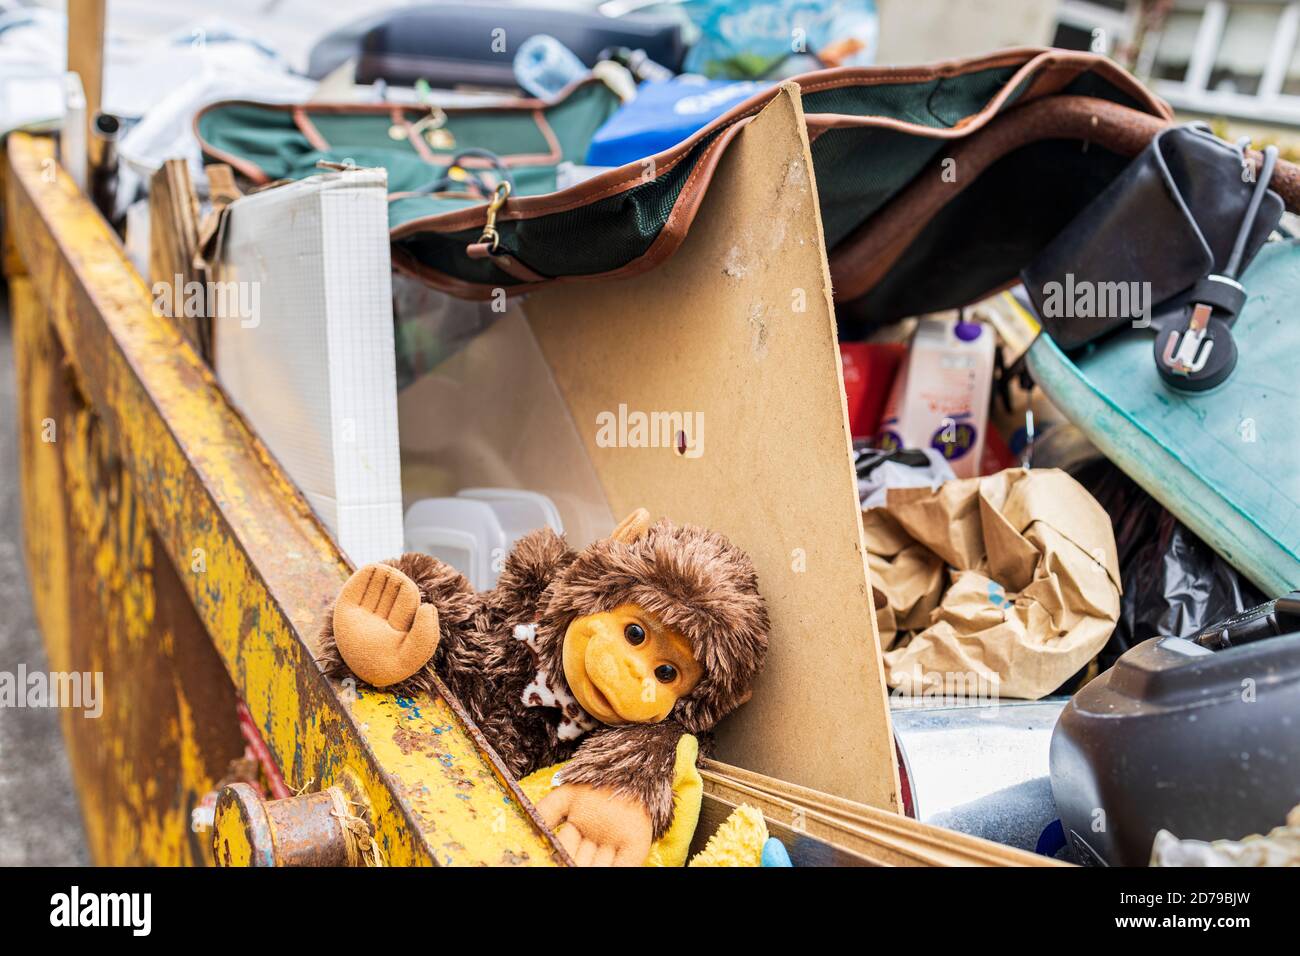 Skip filled with household junk and a cuddly toy monkey, in Kinsale, County Cork, Ireland Stock Photo